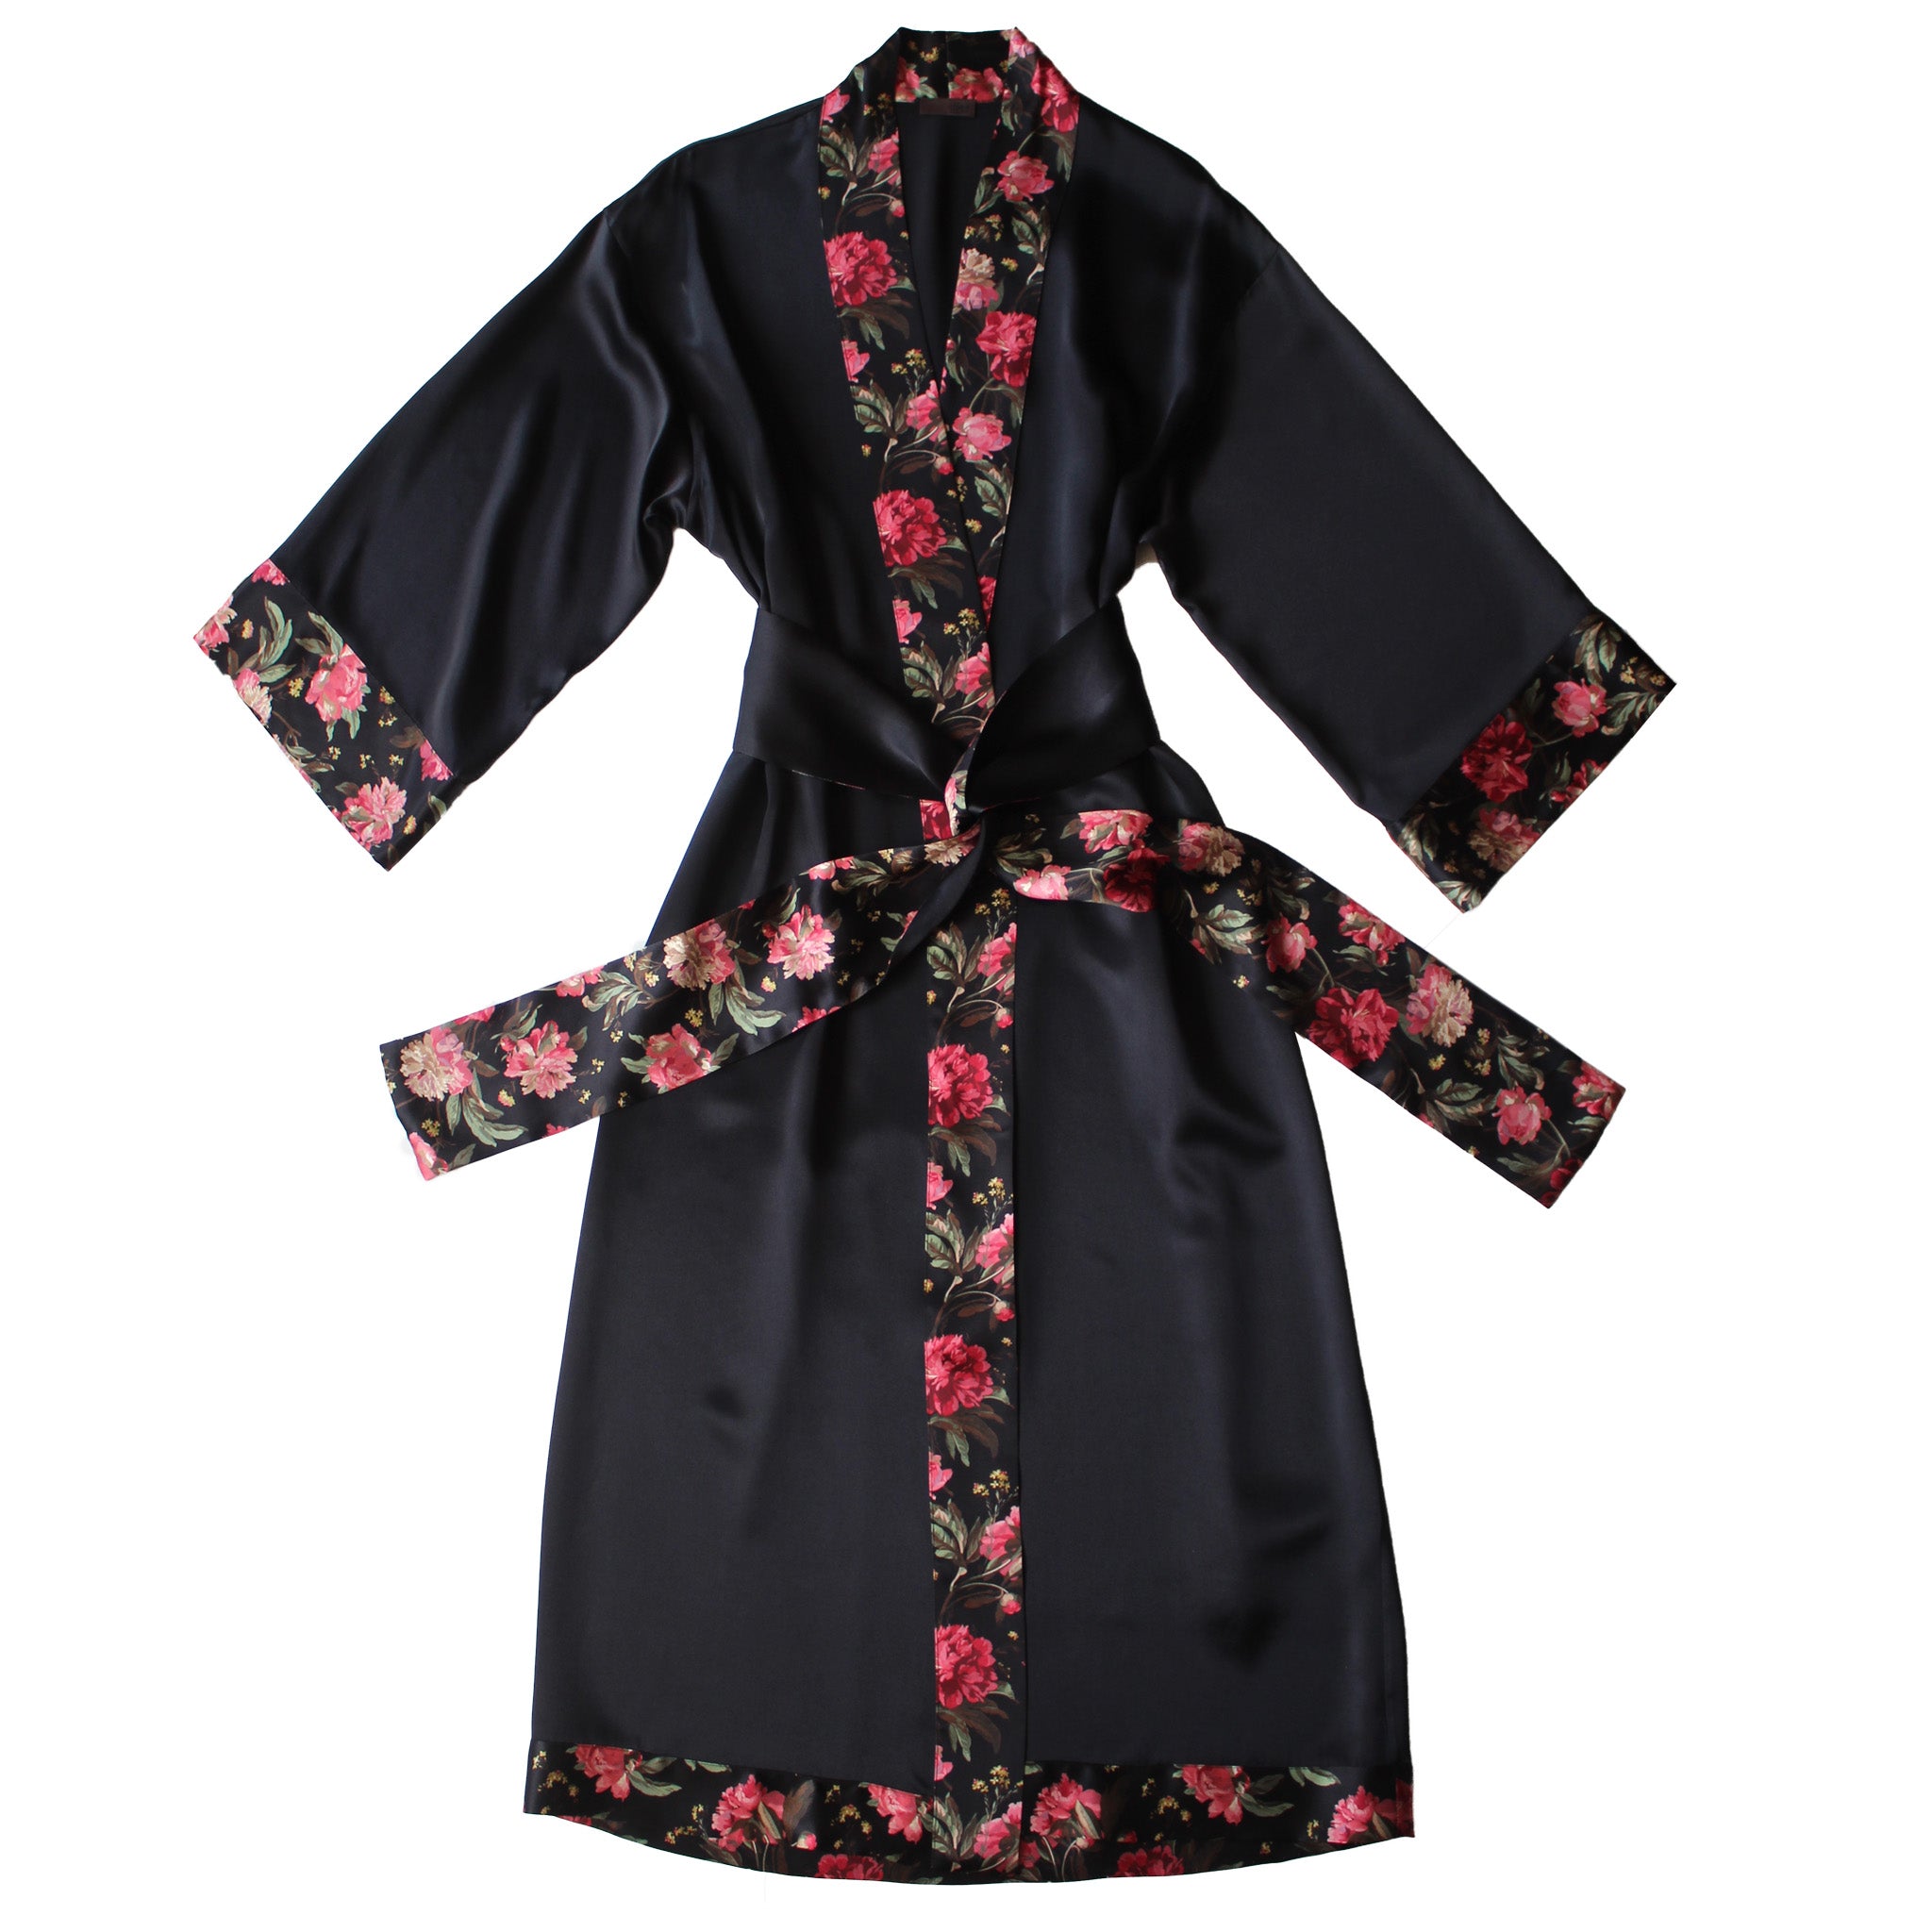 Asteria Kimono Robe in Black Silk Charmeuse with Liberty of London Decadent Blooms Contrast